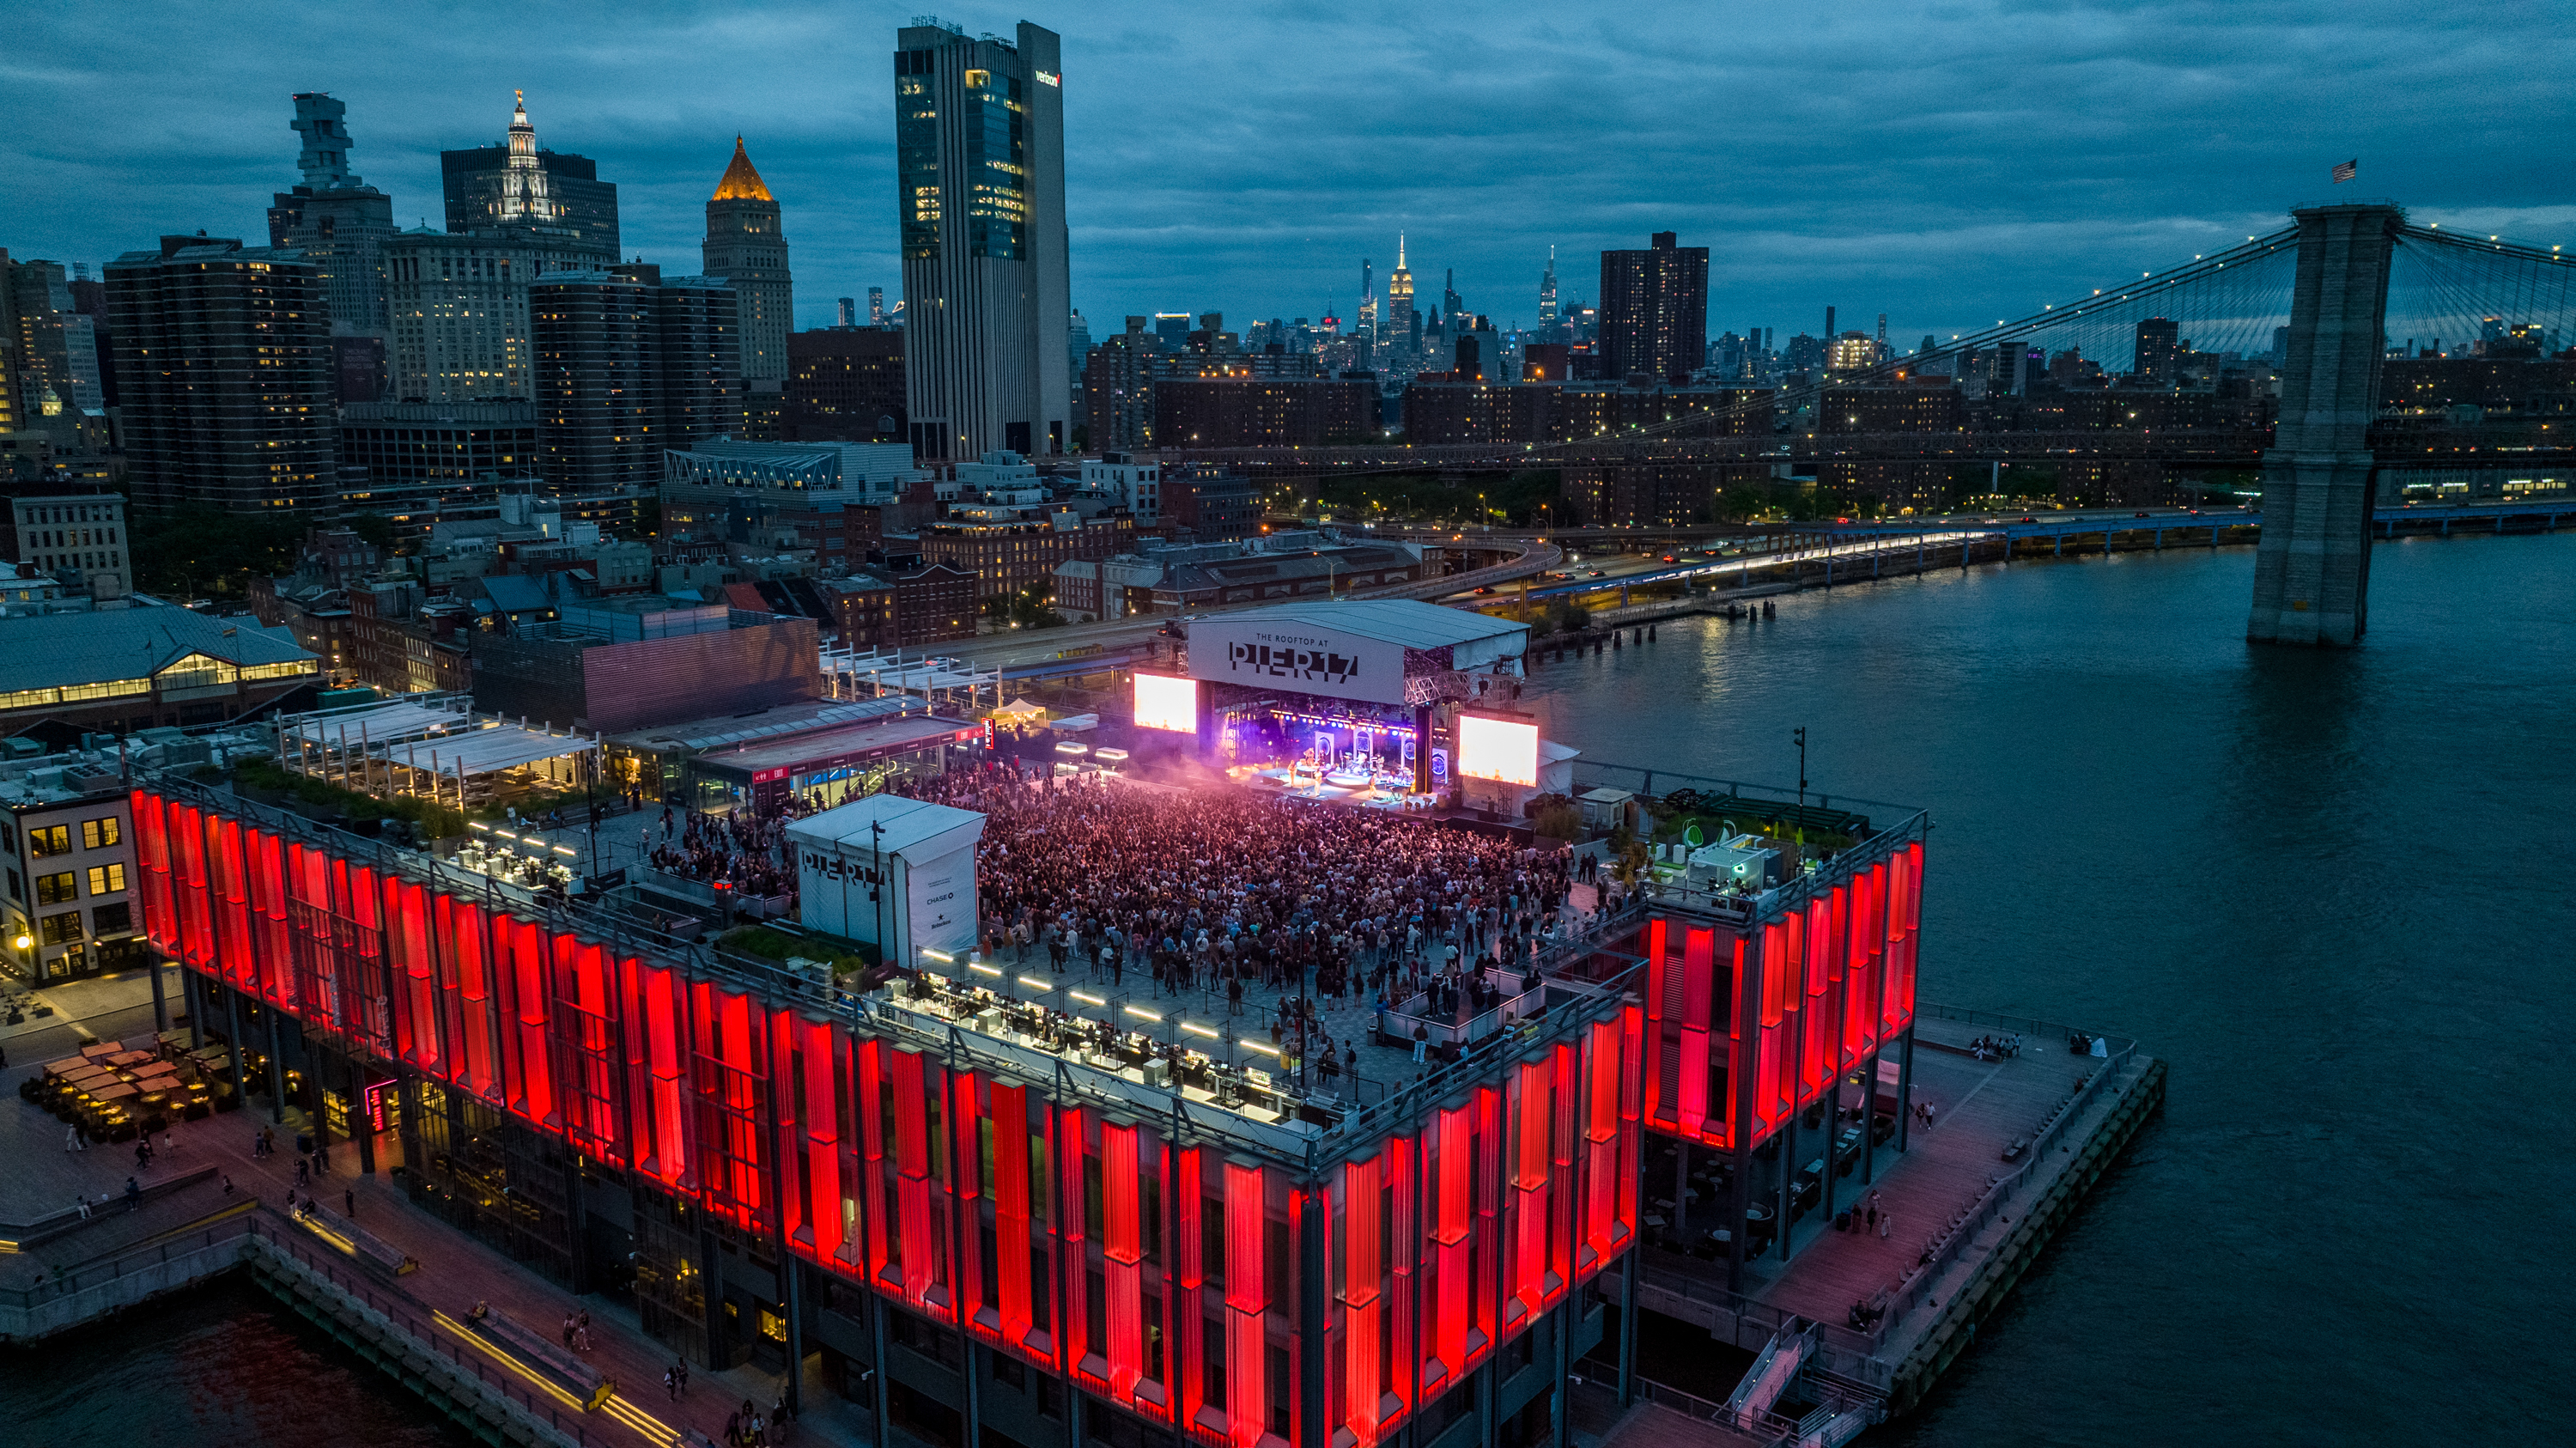 A crowded rooftop stage at Pier 17 in Manhattan.